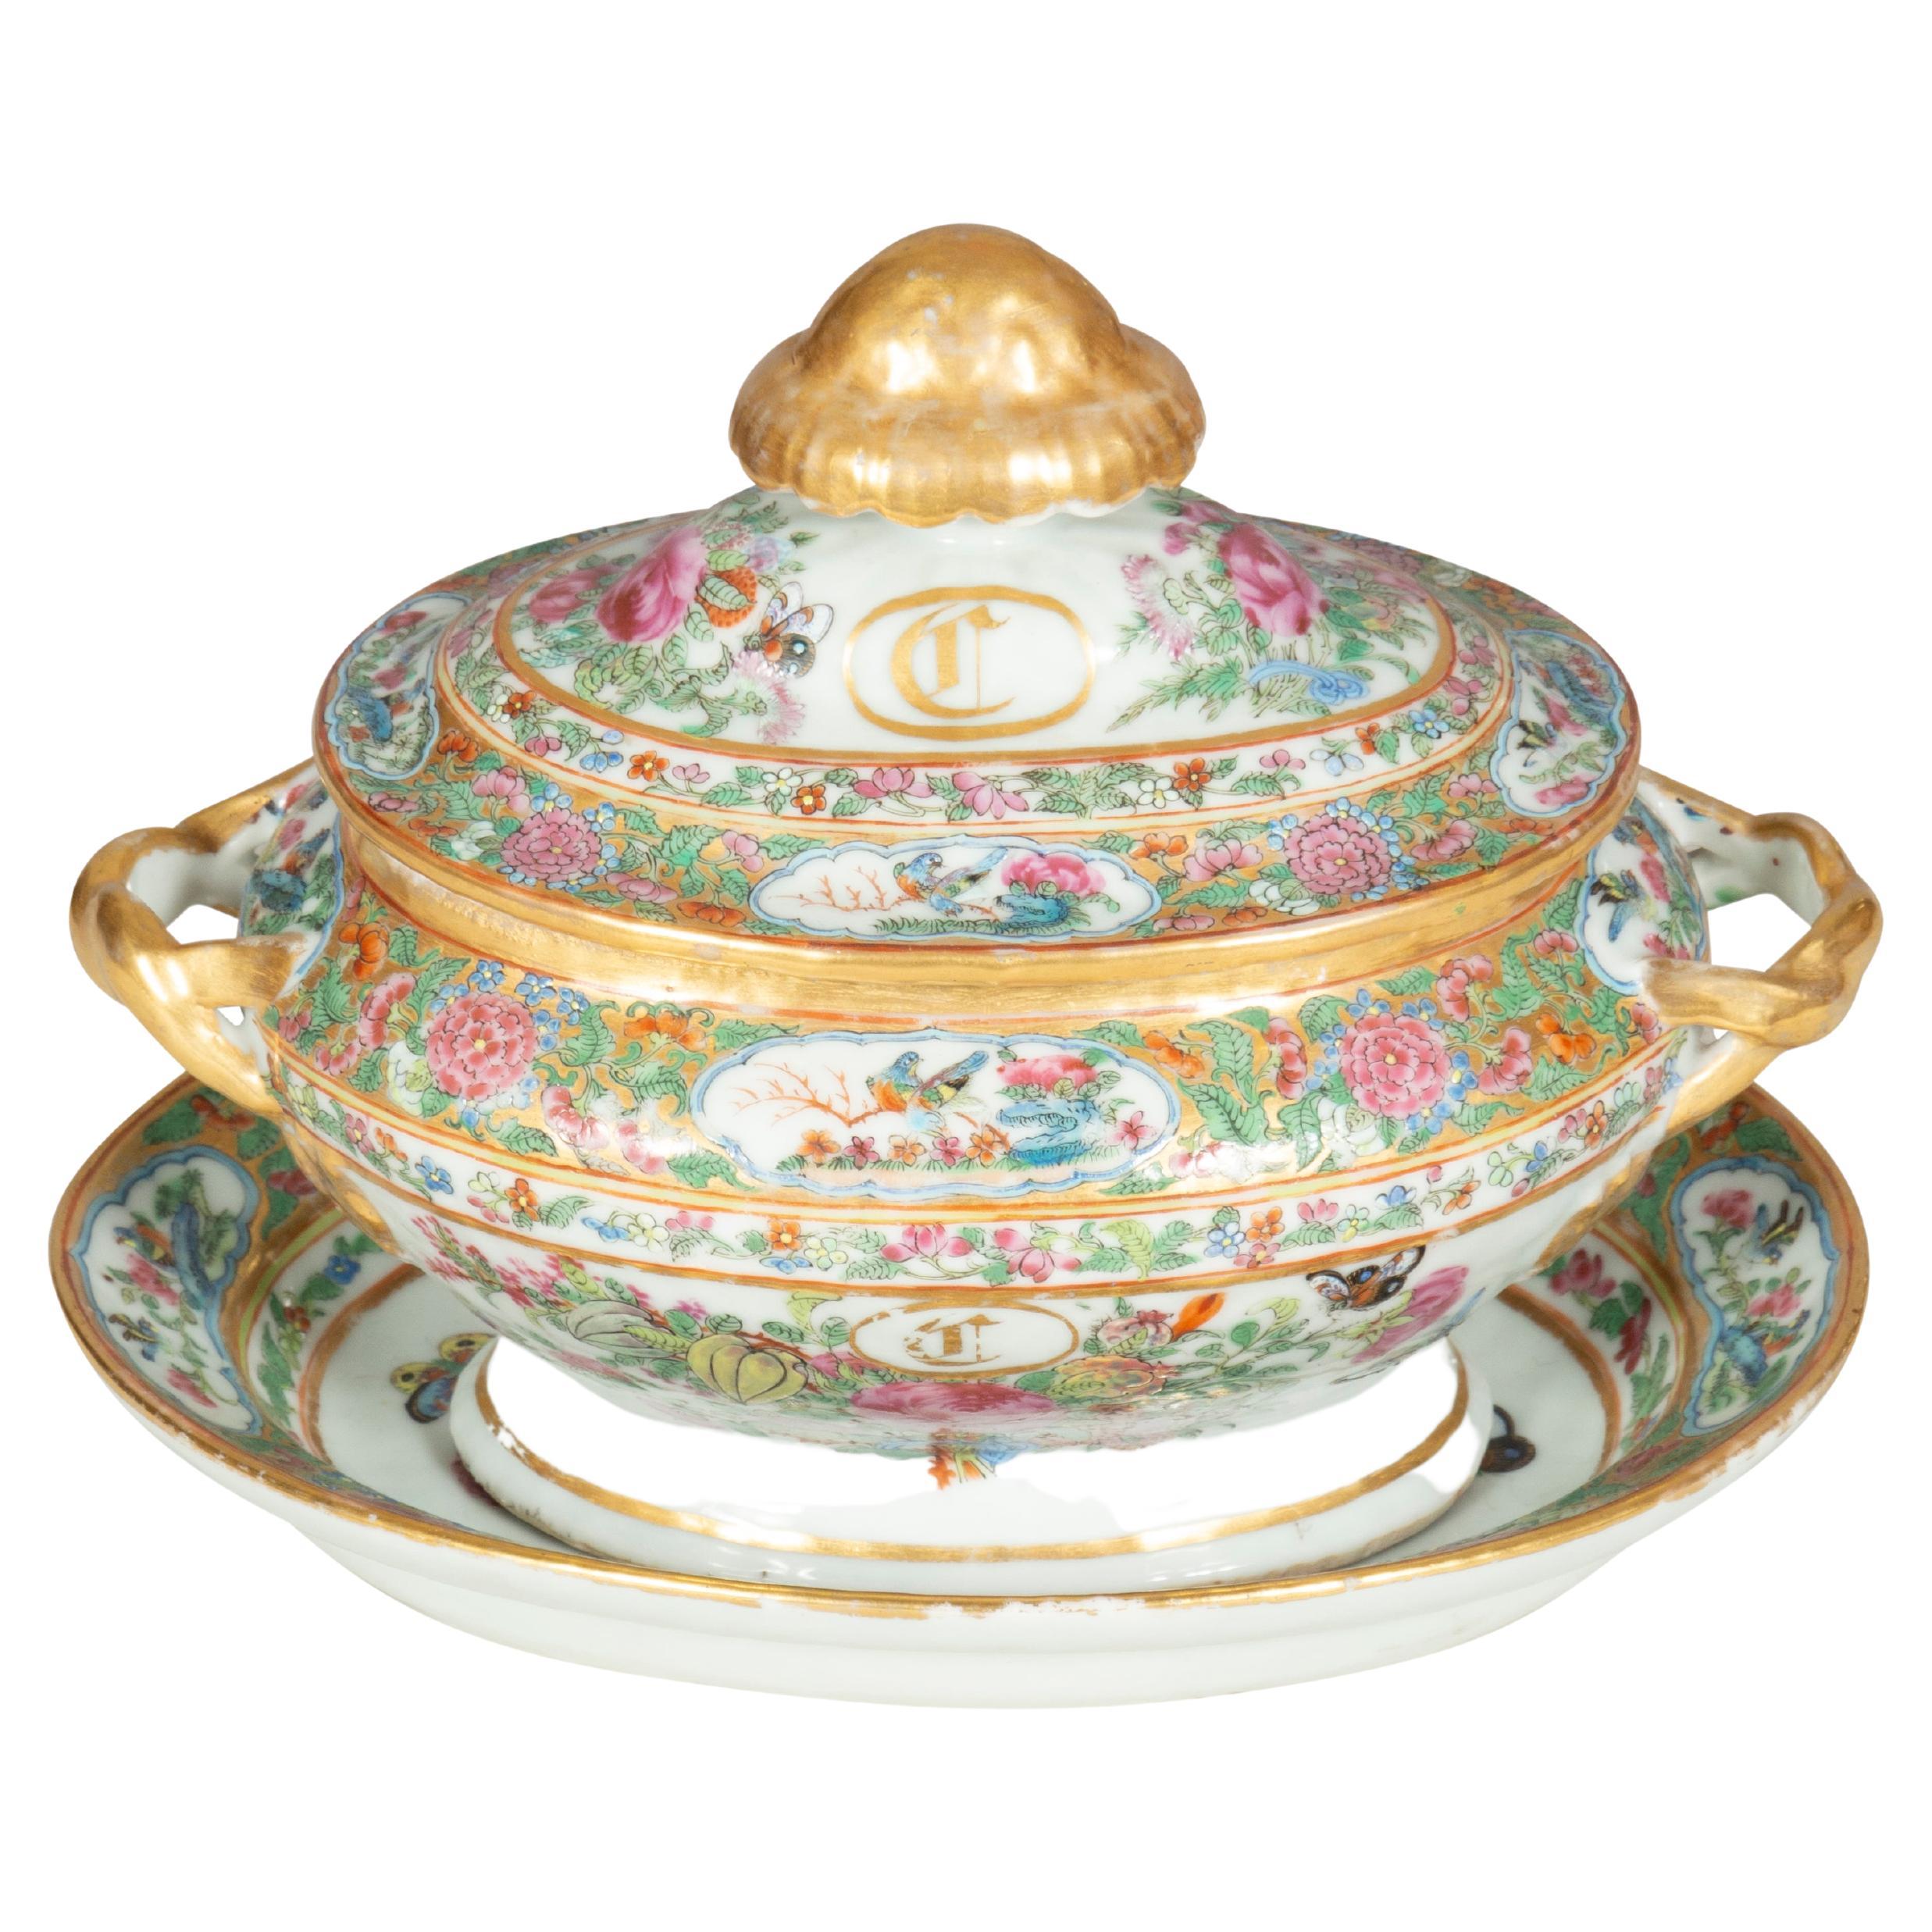 Chinese Export Famille Rose Porcelain Sauce Tureen And Underplate